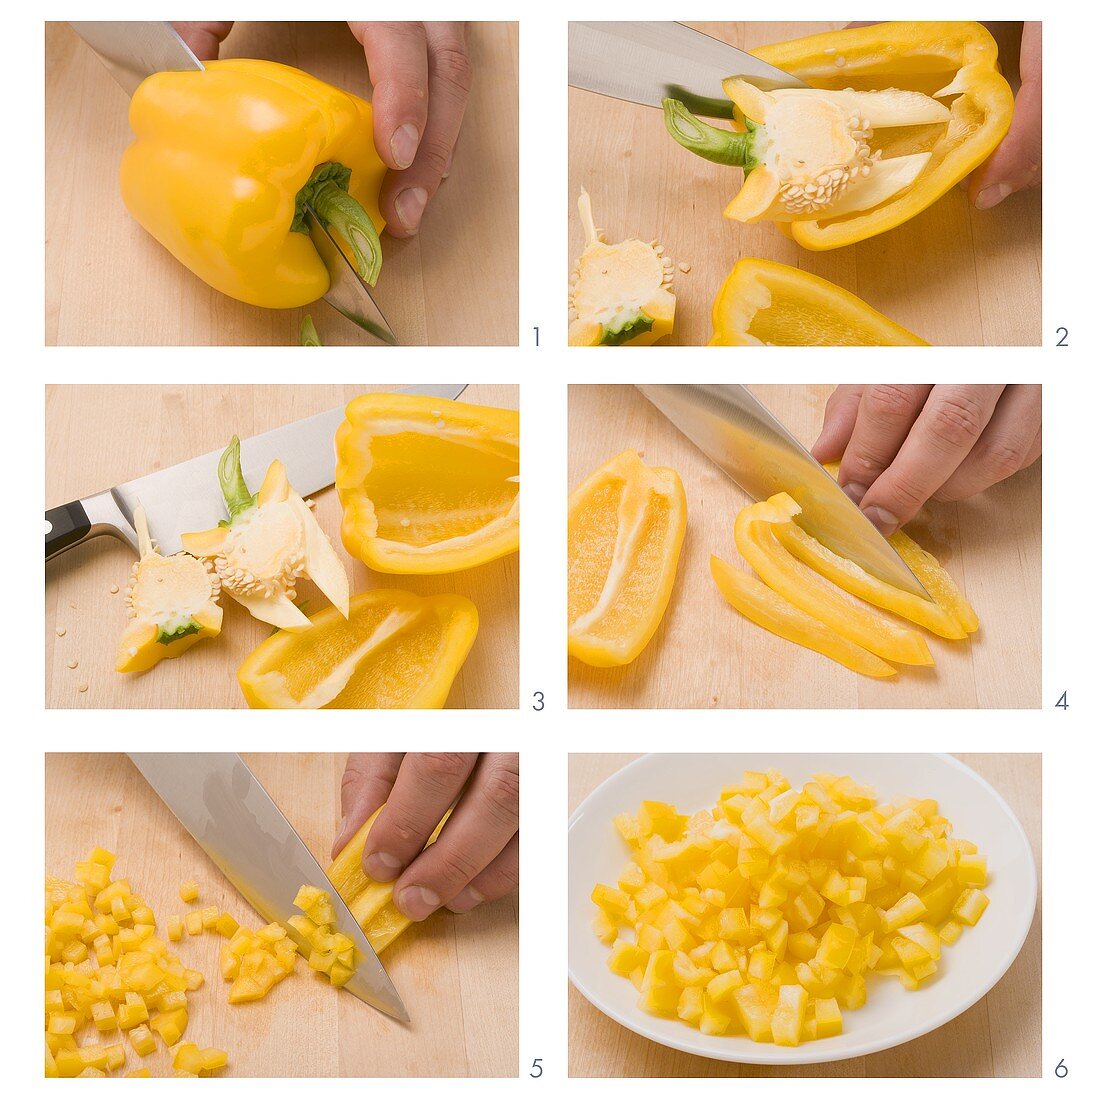 A yellow pepper being deseeded and diced